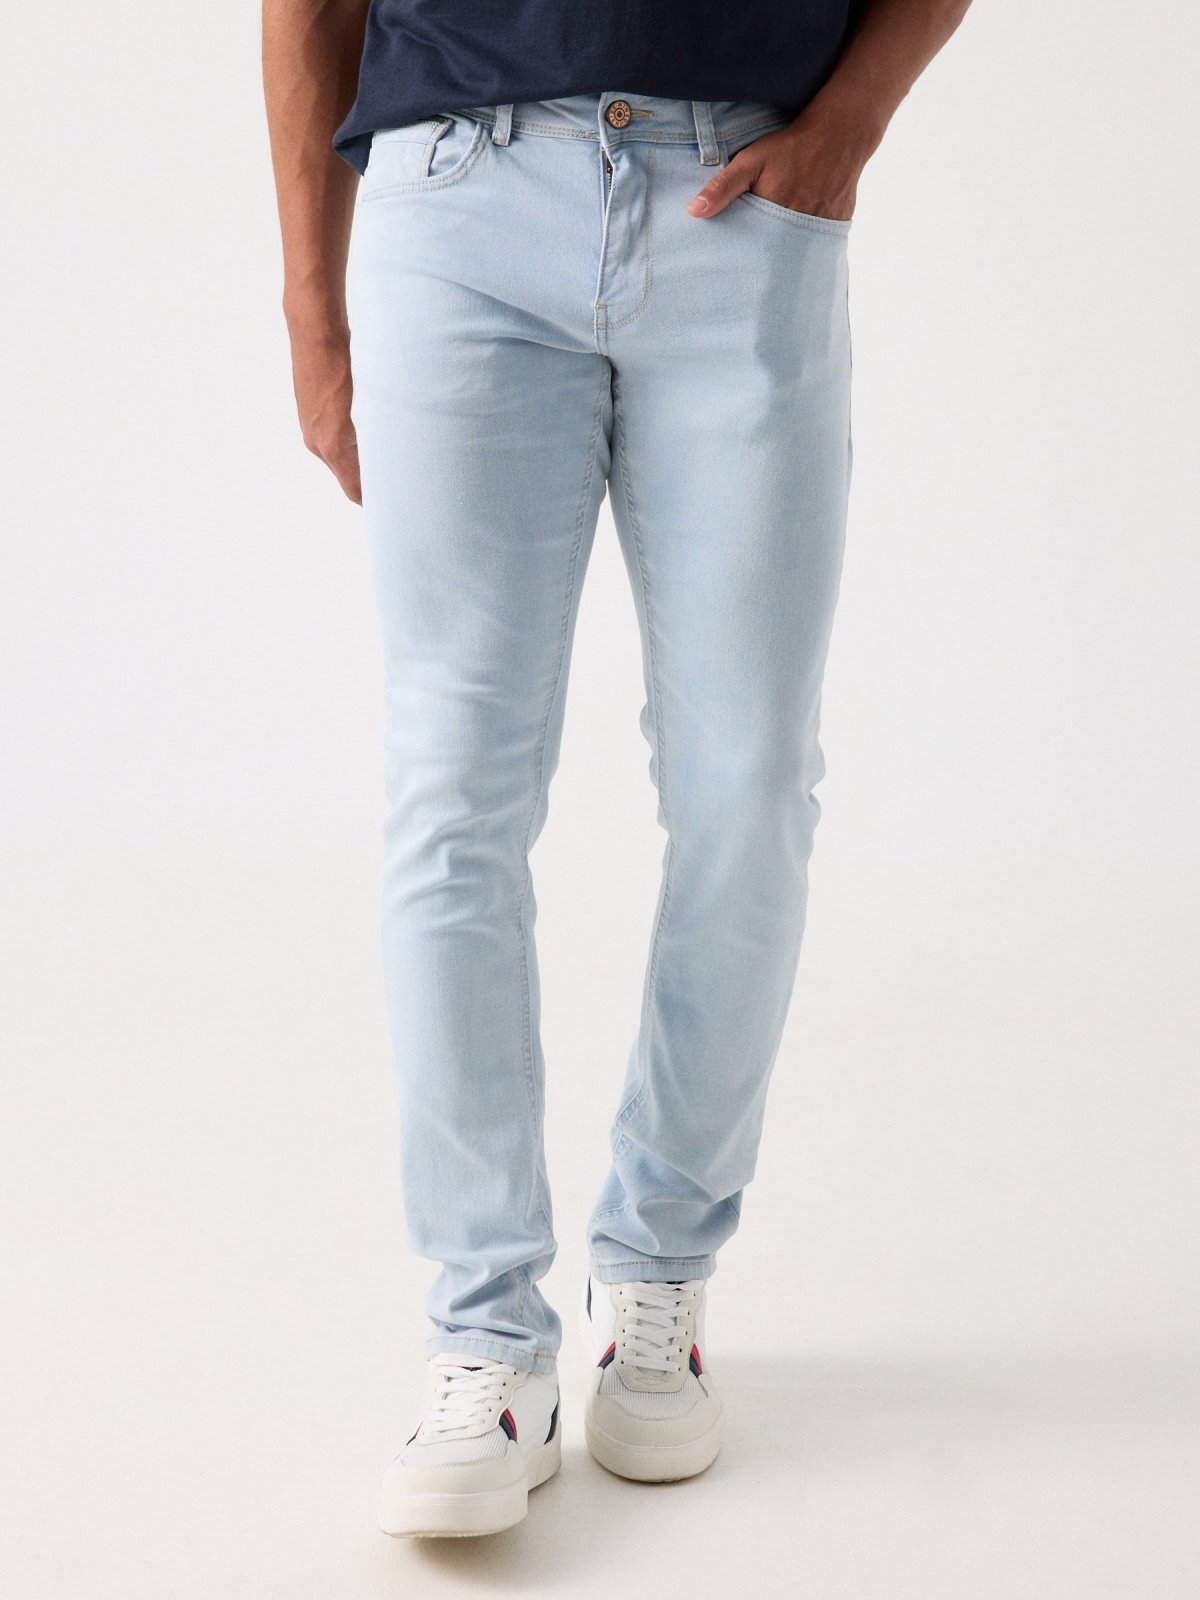 Slim-bleached jeans blue/white middle front view